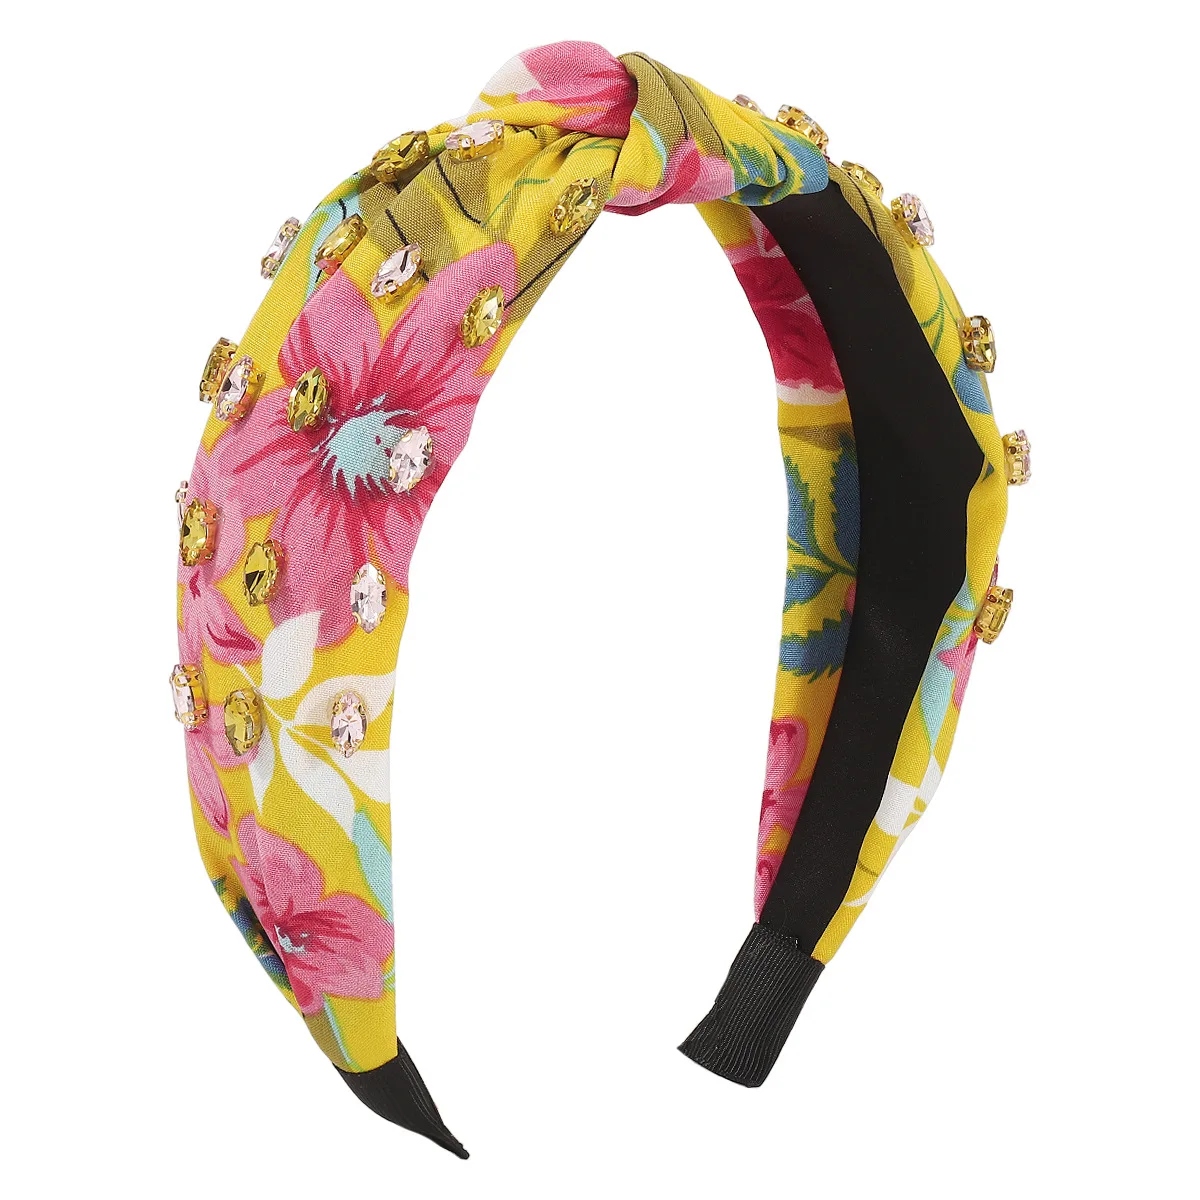 Hairhoop Hairpin Headband fashionable printed fabric knotted high skull top hair hoop simple and elegant with drill bit hoop european and american heart shape with diamond candy color headband creative personality sweet cool fabric knotted hairband